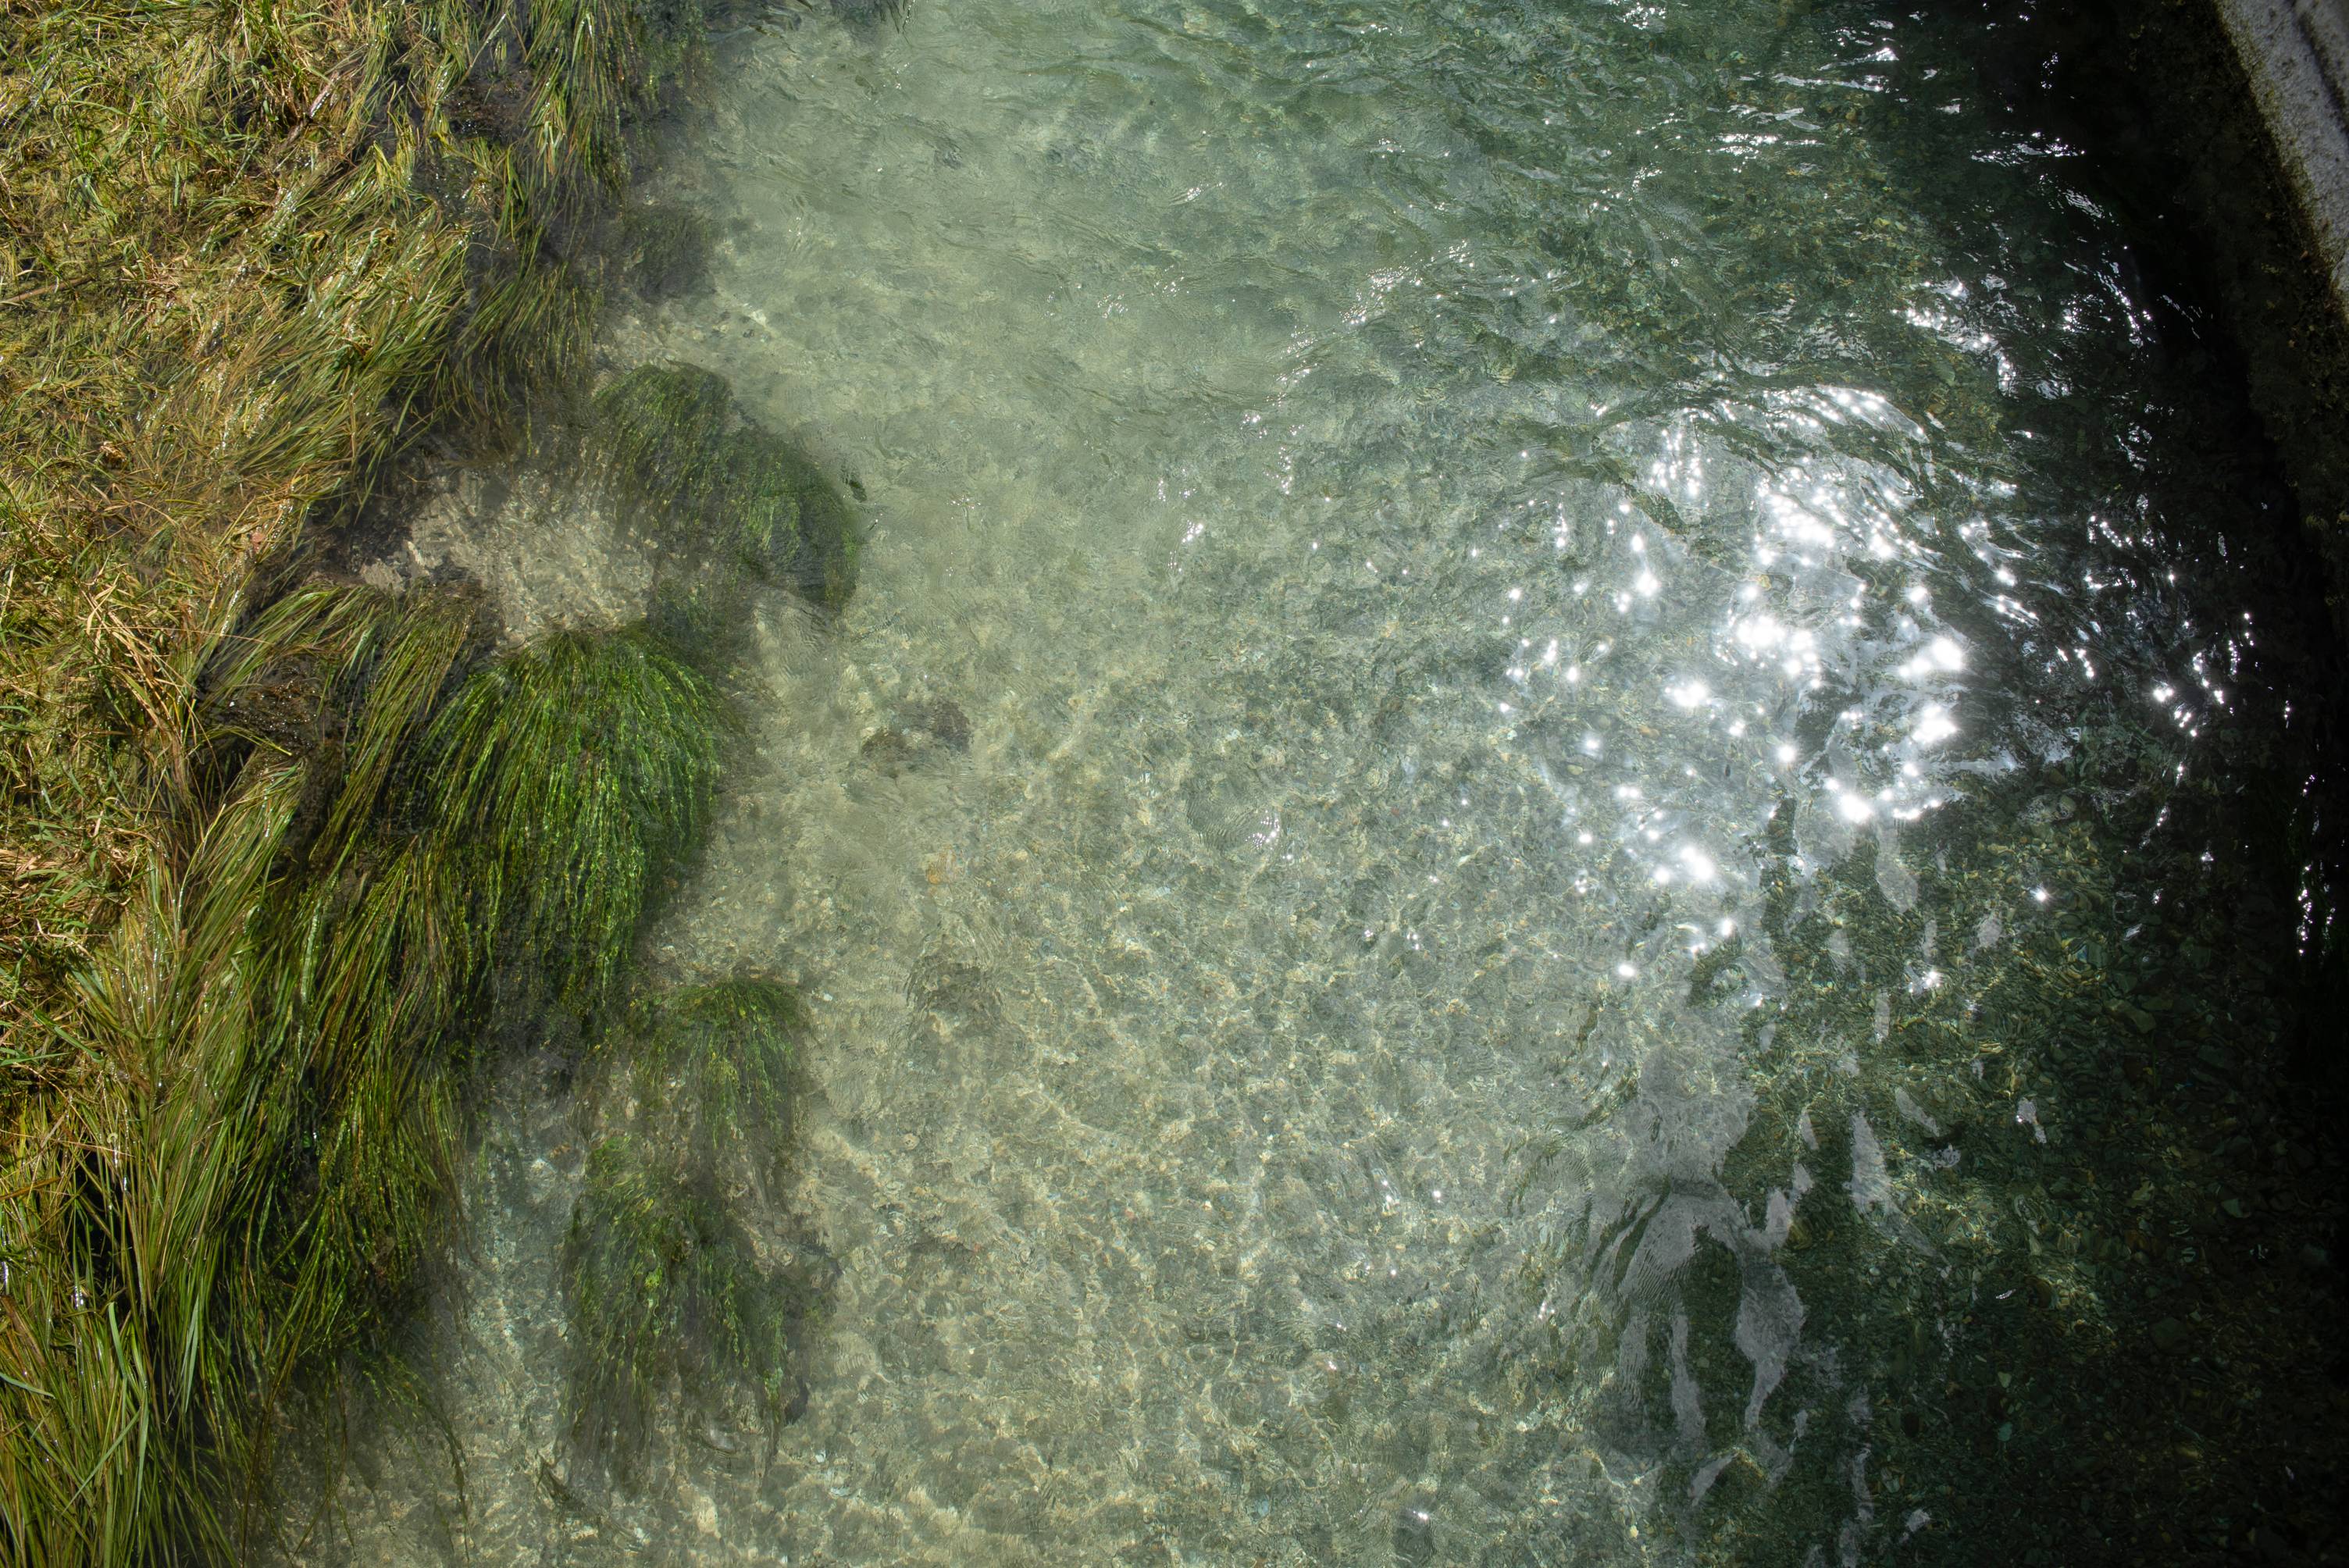 San Marcos River is green and clear.